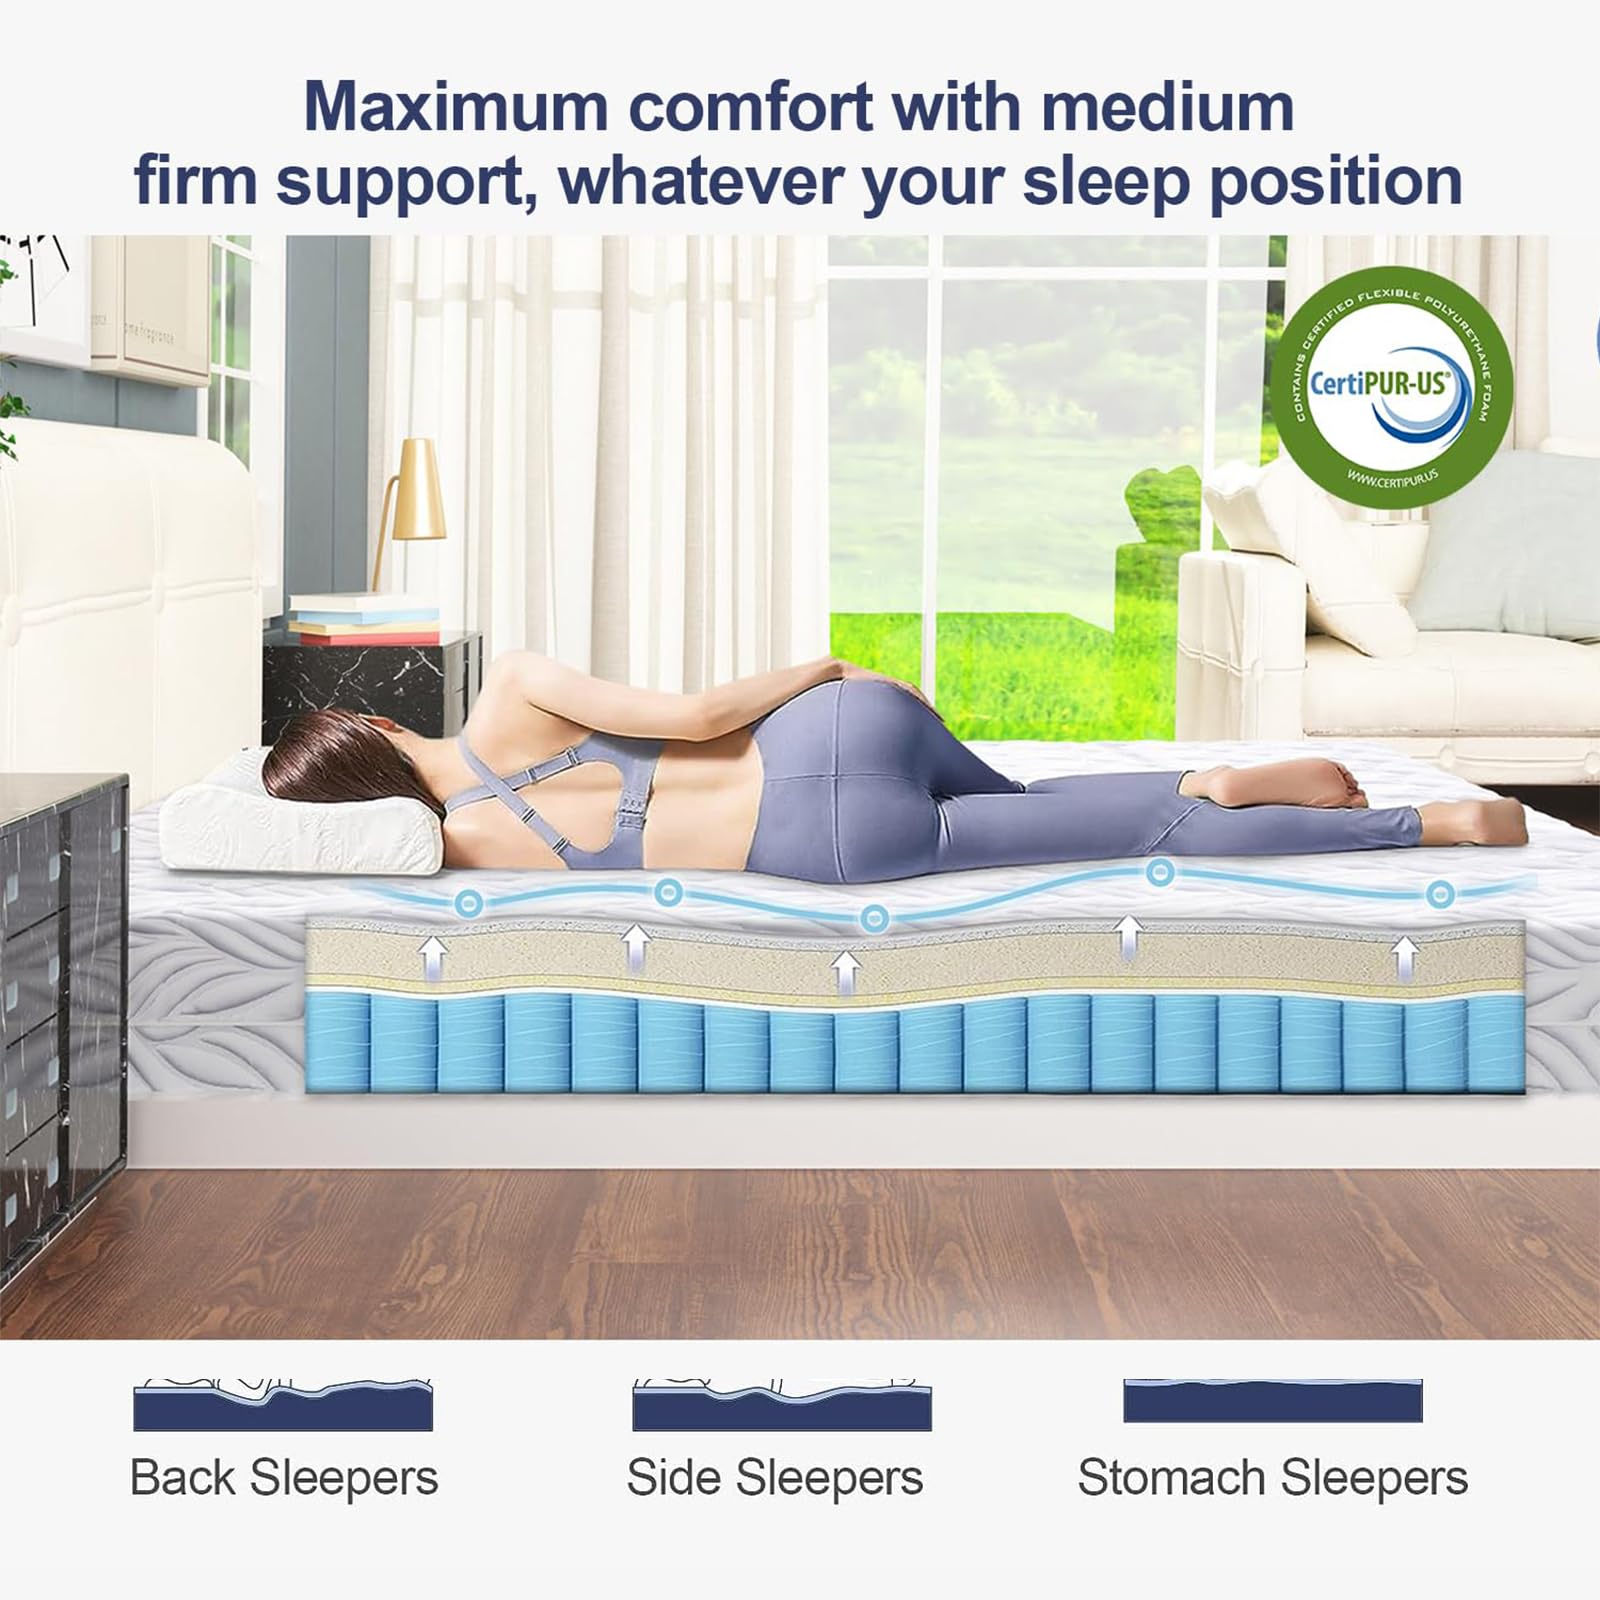 TMEOSK Queen Size Mattress, 10 inch Gel Memory Foam Mattress, Cooling Gel Infused Mattress Bed in a Box, Medium Firm Feel with Motion Isolating (Queen)